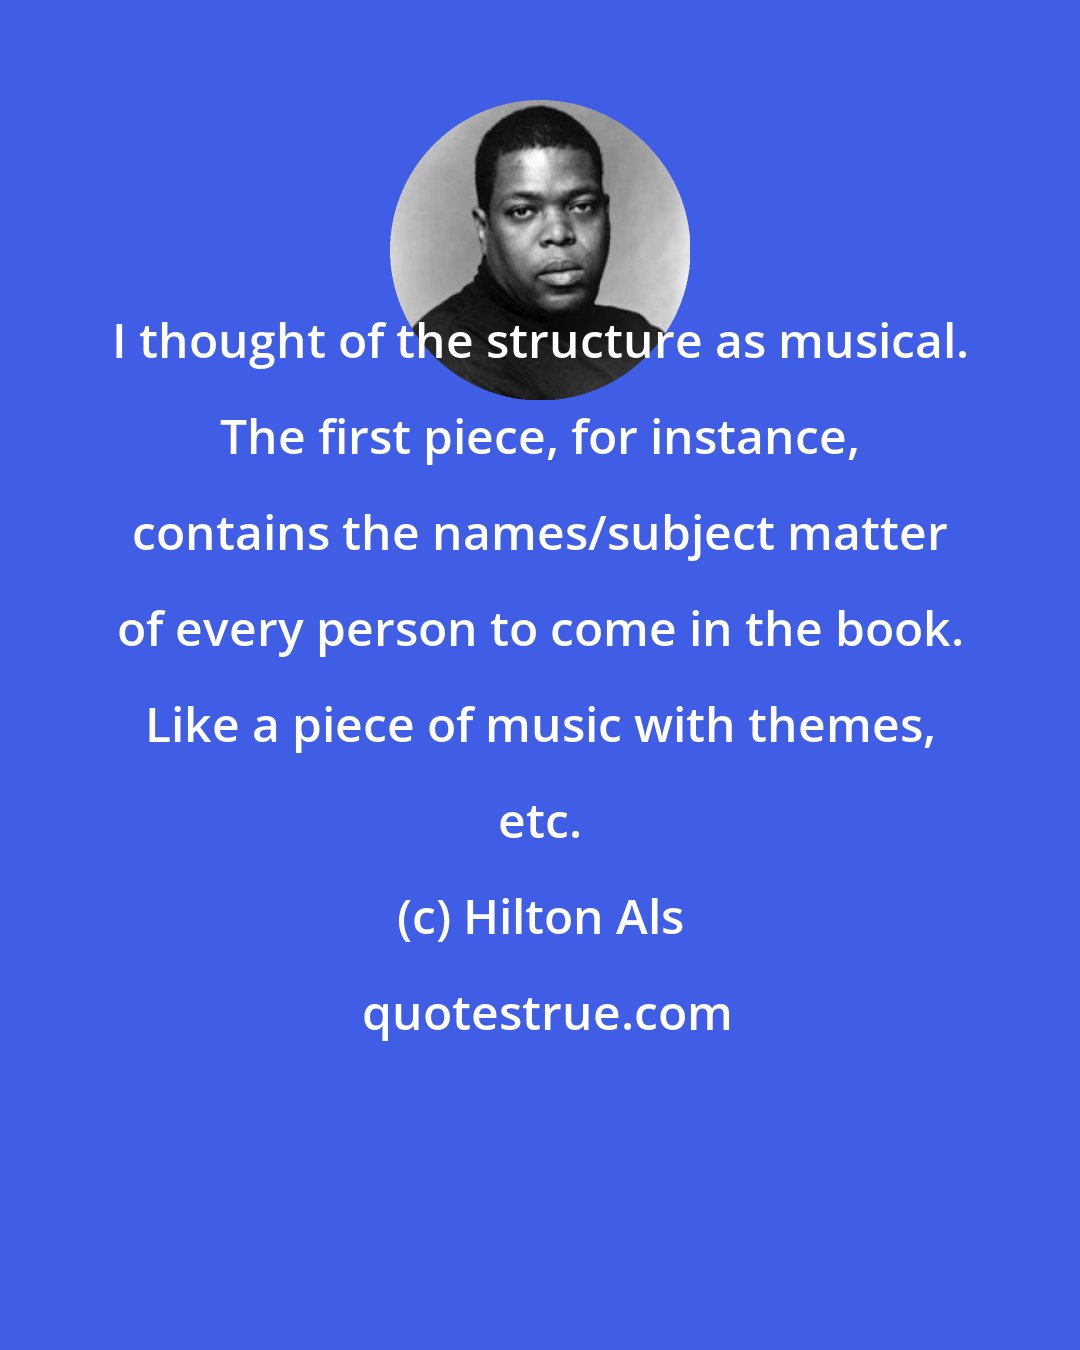 Hilton Als: I thought of the structure as musical. The first piece, for instance, contains the names/subject matter of every person to come in the book. Like a piece of music with themes, etc.